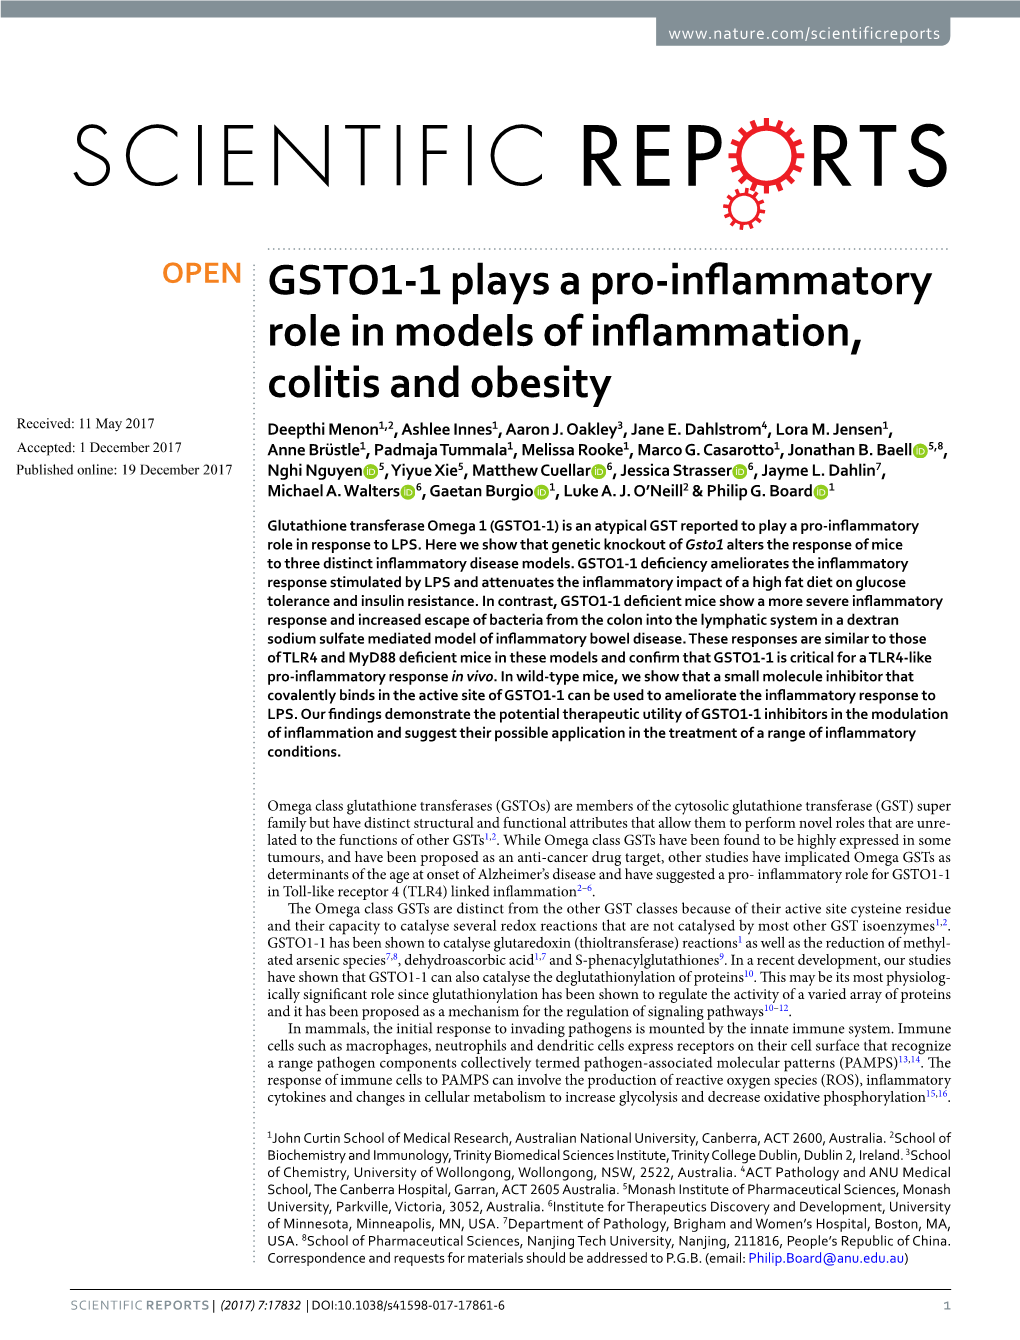 GSTO1-1 Plays a Pro-Inflammatory Role in Models of Inflammation, Colitis and Obesity